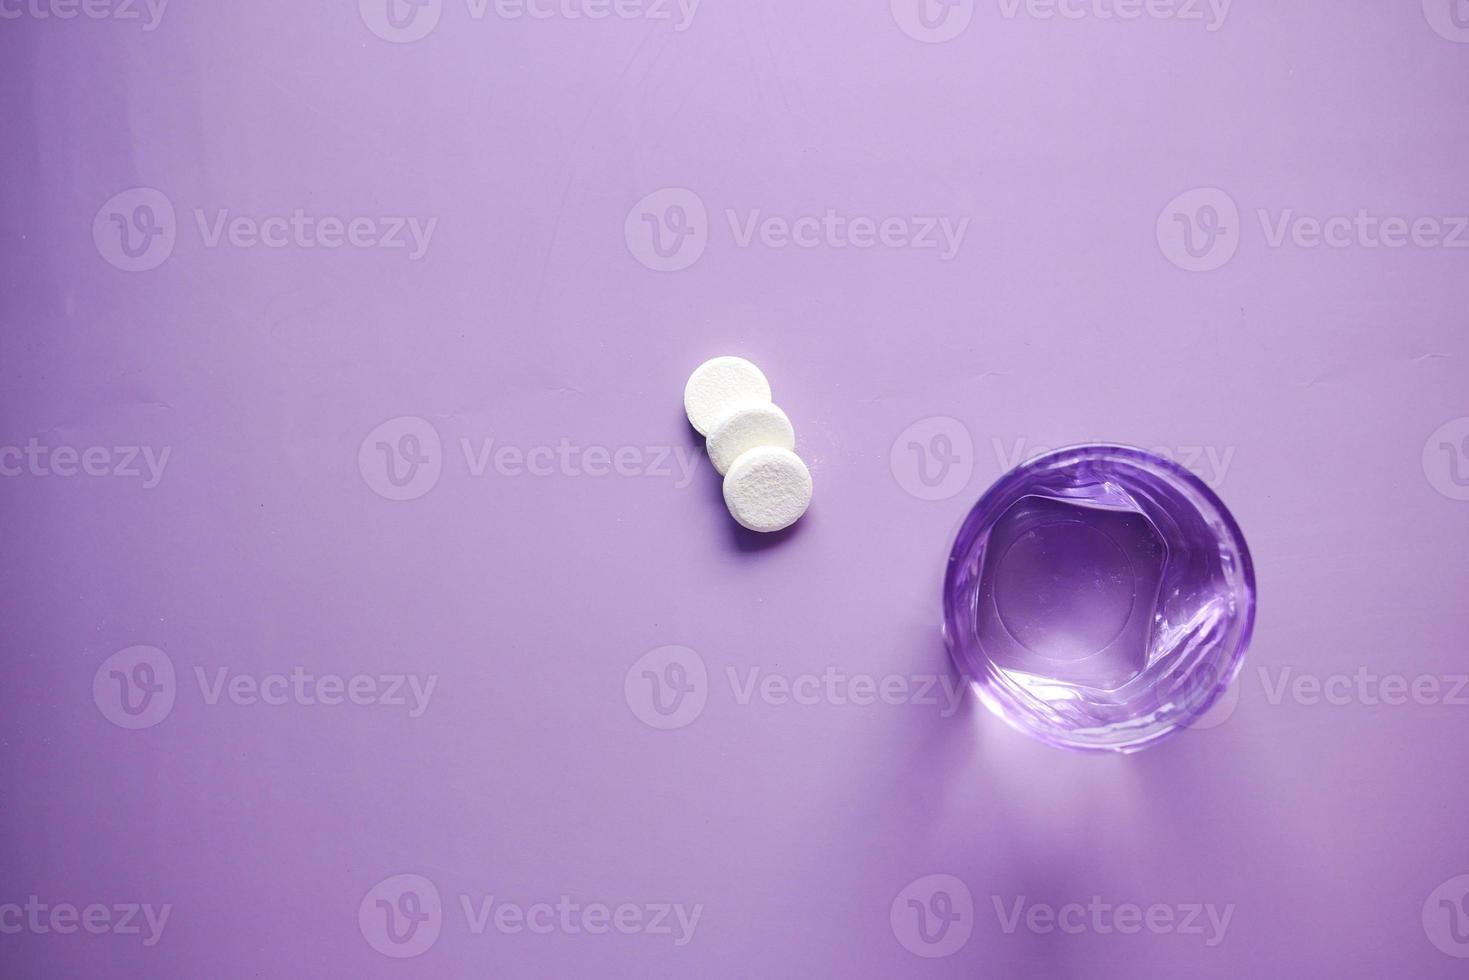 Effervescent soluble tablet pills and glass of water on purple background photo